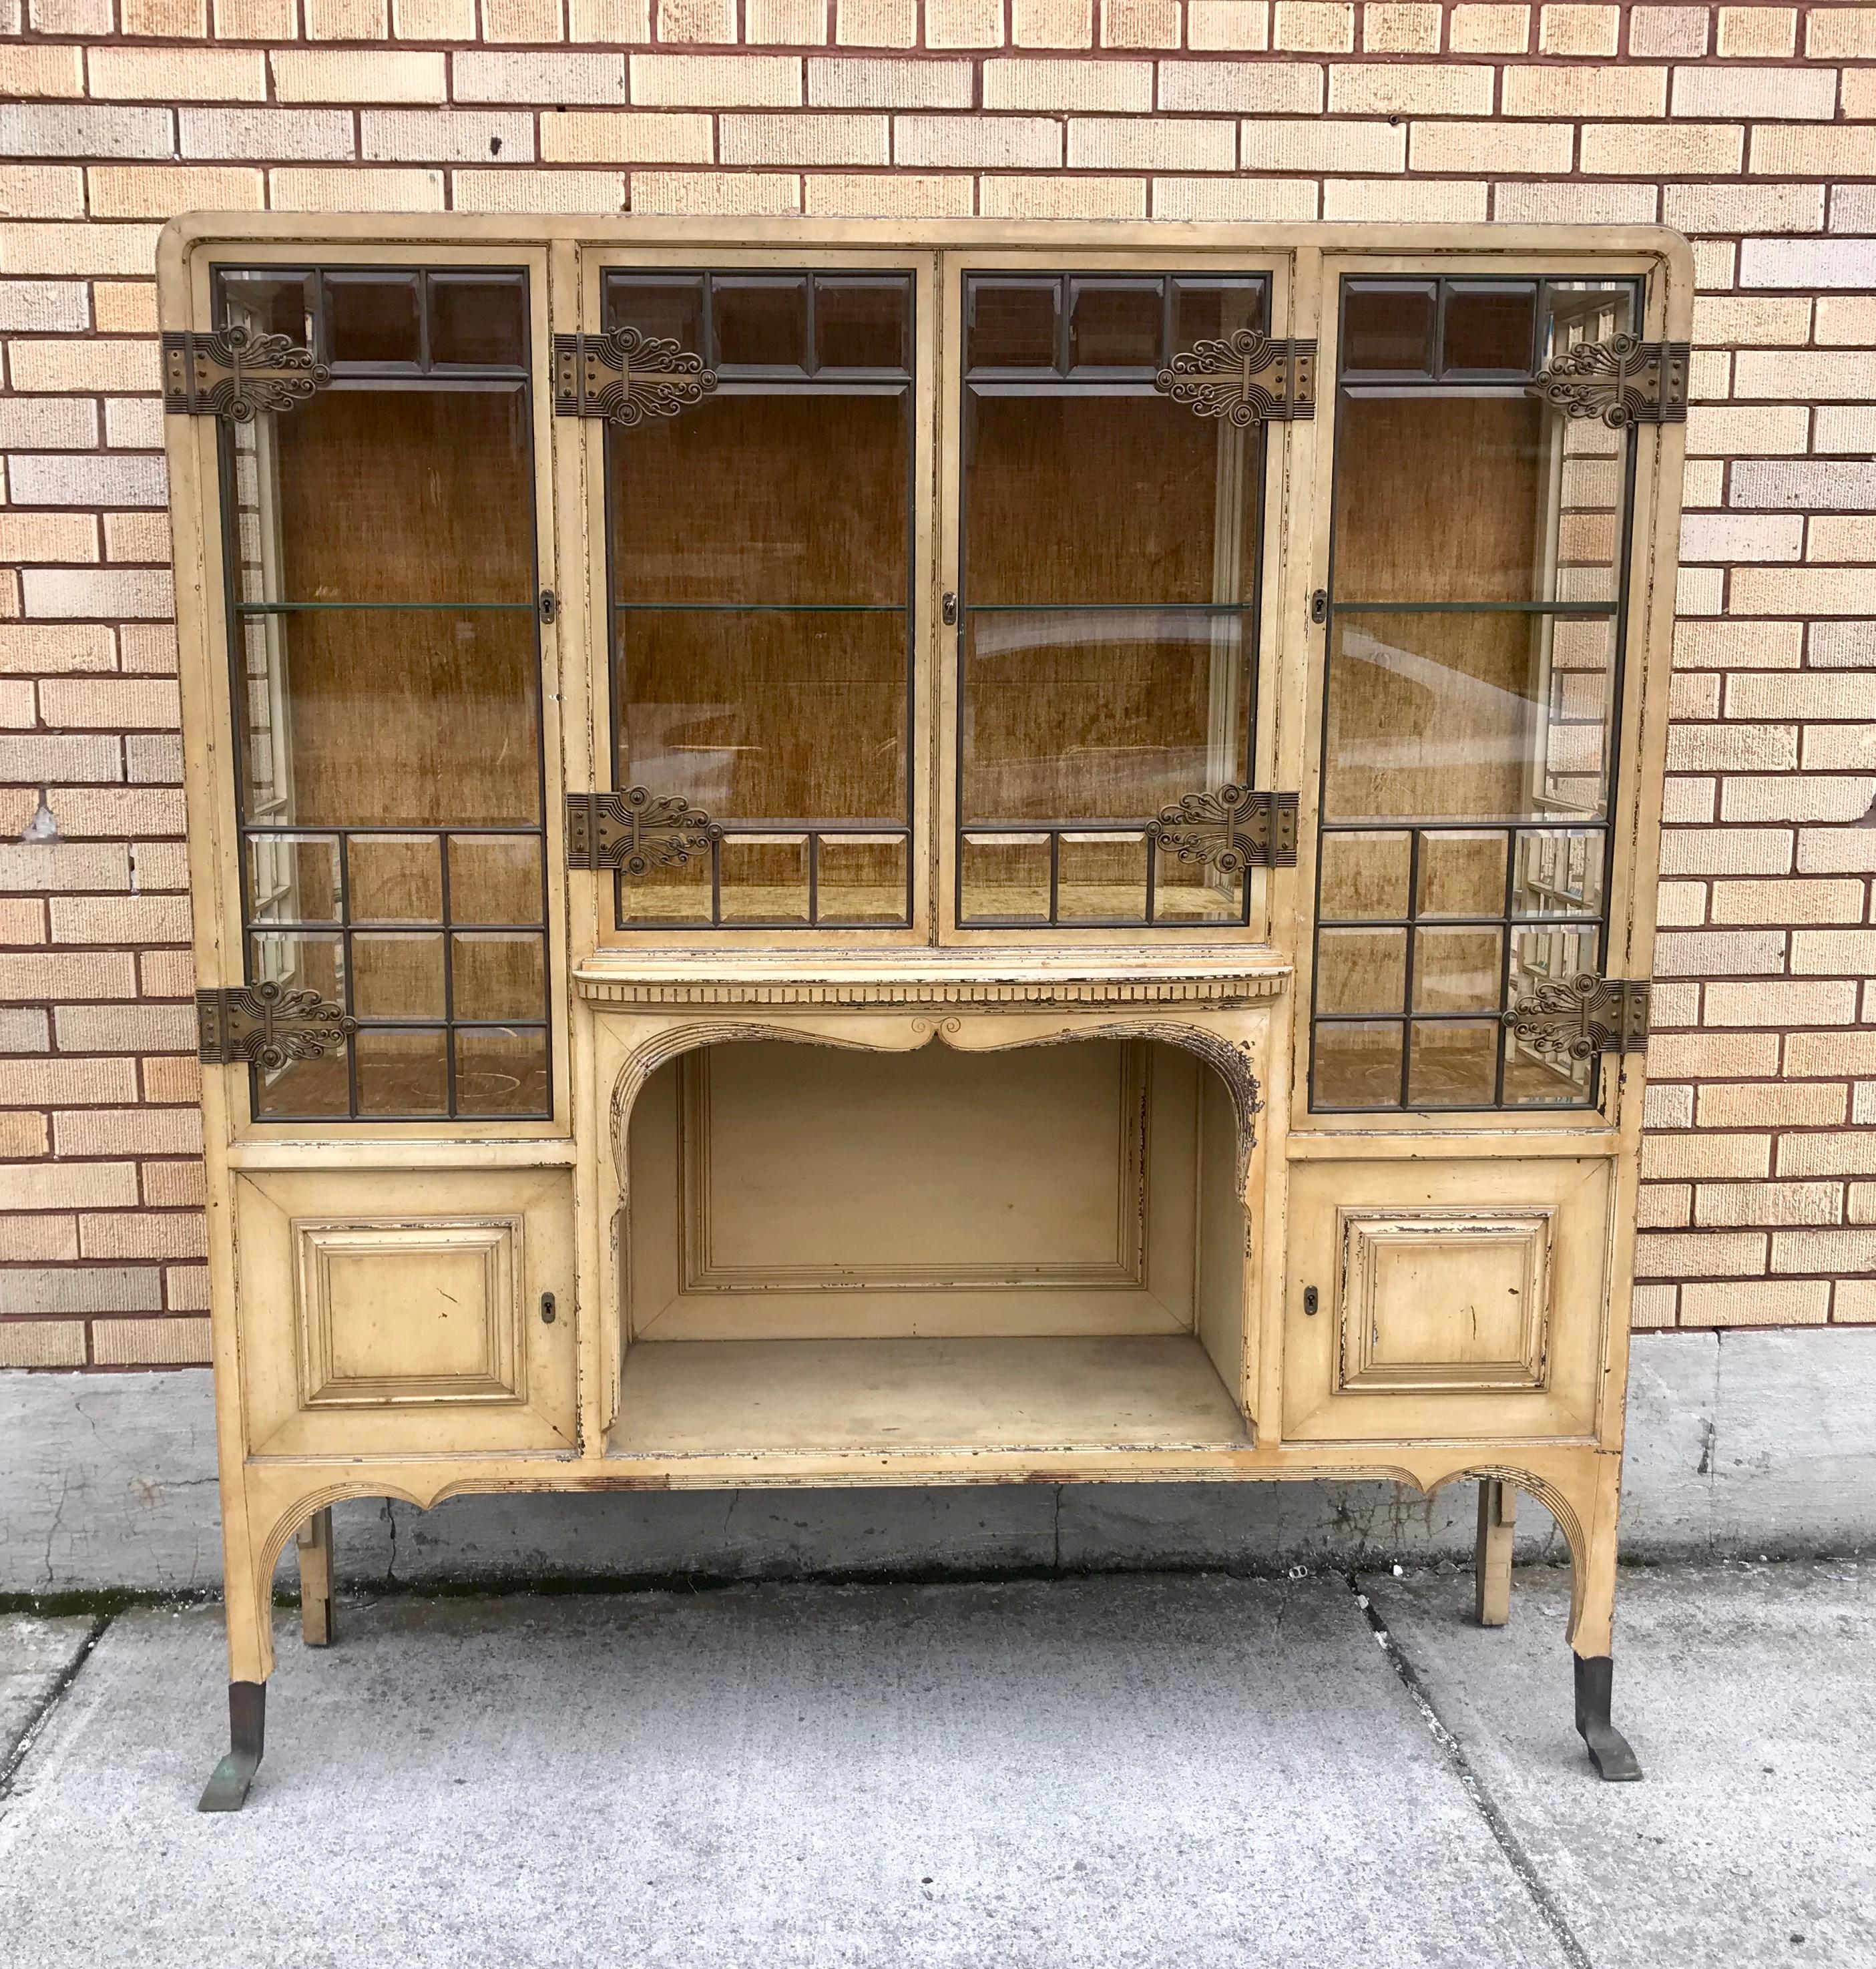 Stunning beveled glass cabinet / etagere. Originally purchased out of fabulous estate in New York City. Stunning appointments and detail. Thick copper beveled glass doors and sides, 3 glass shelves on brass rails, heavy brass Art Deco hasp door